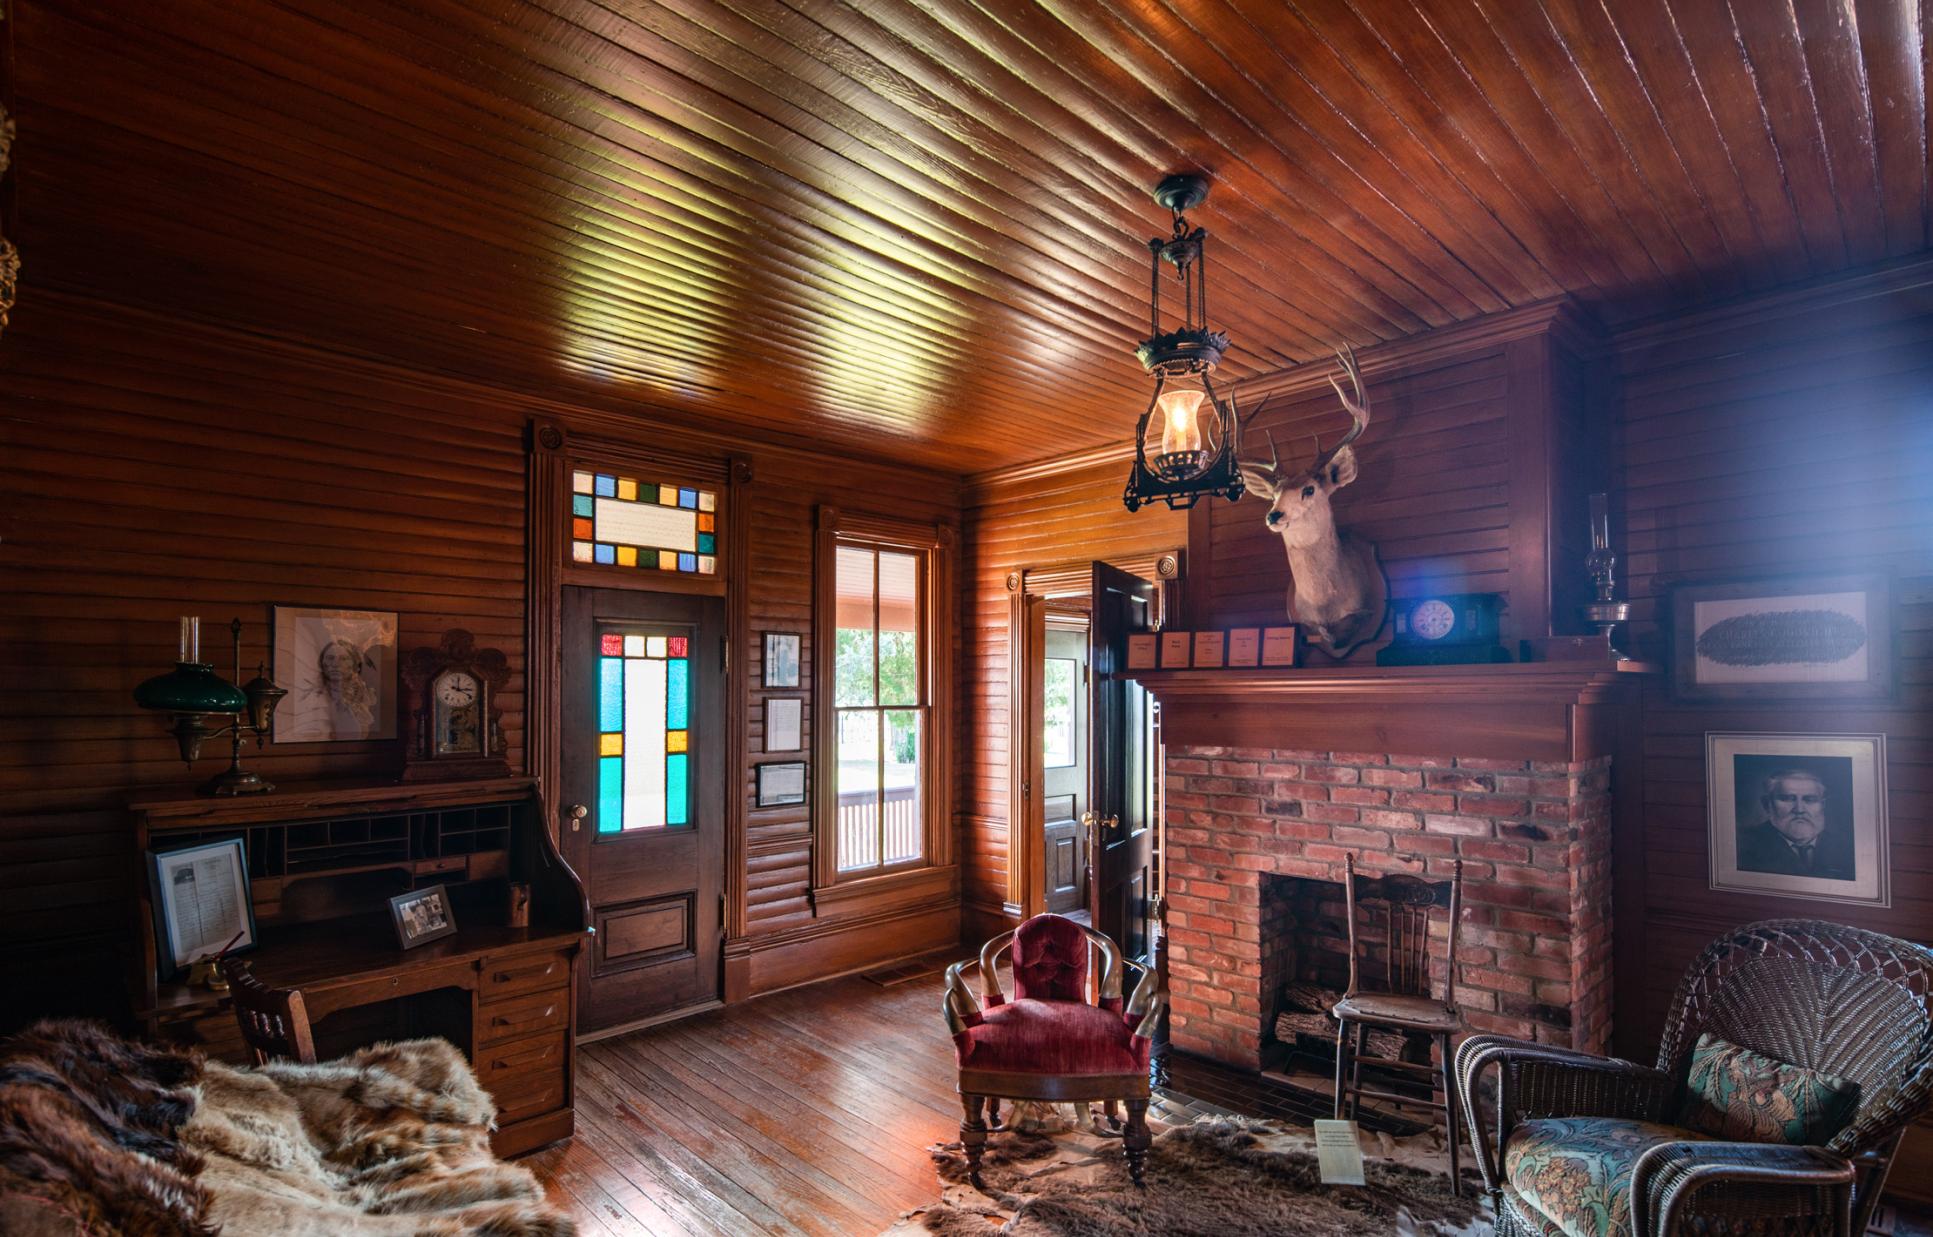 Living room of the main ranch house